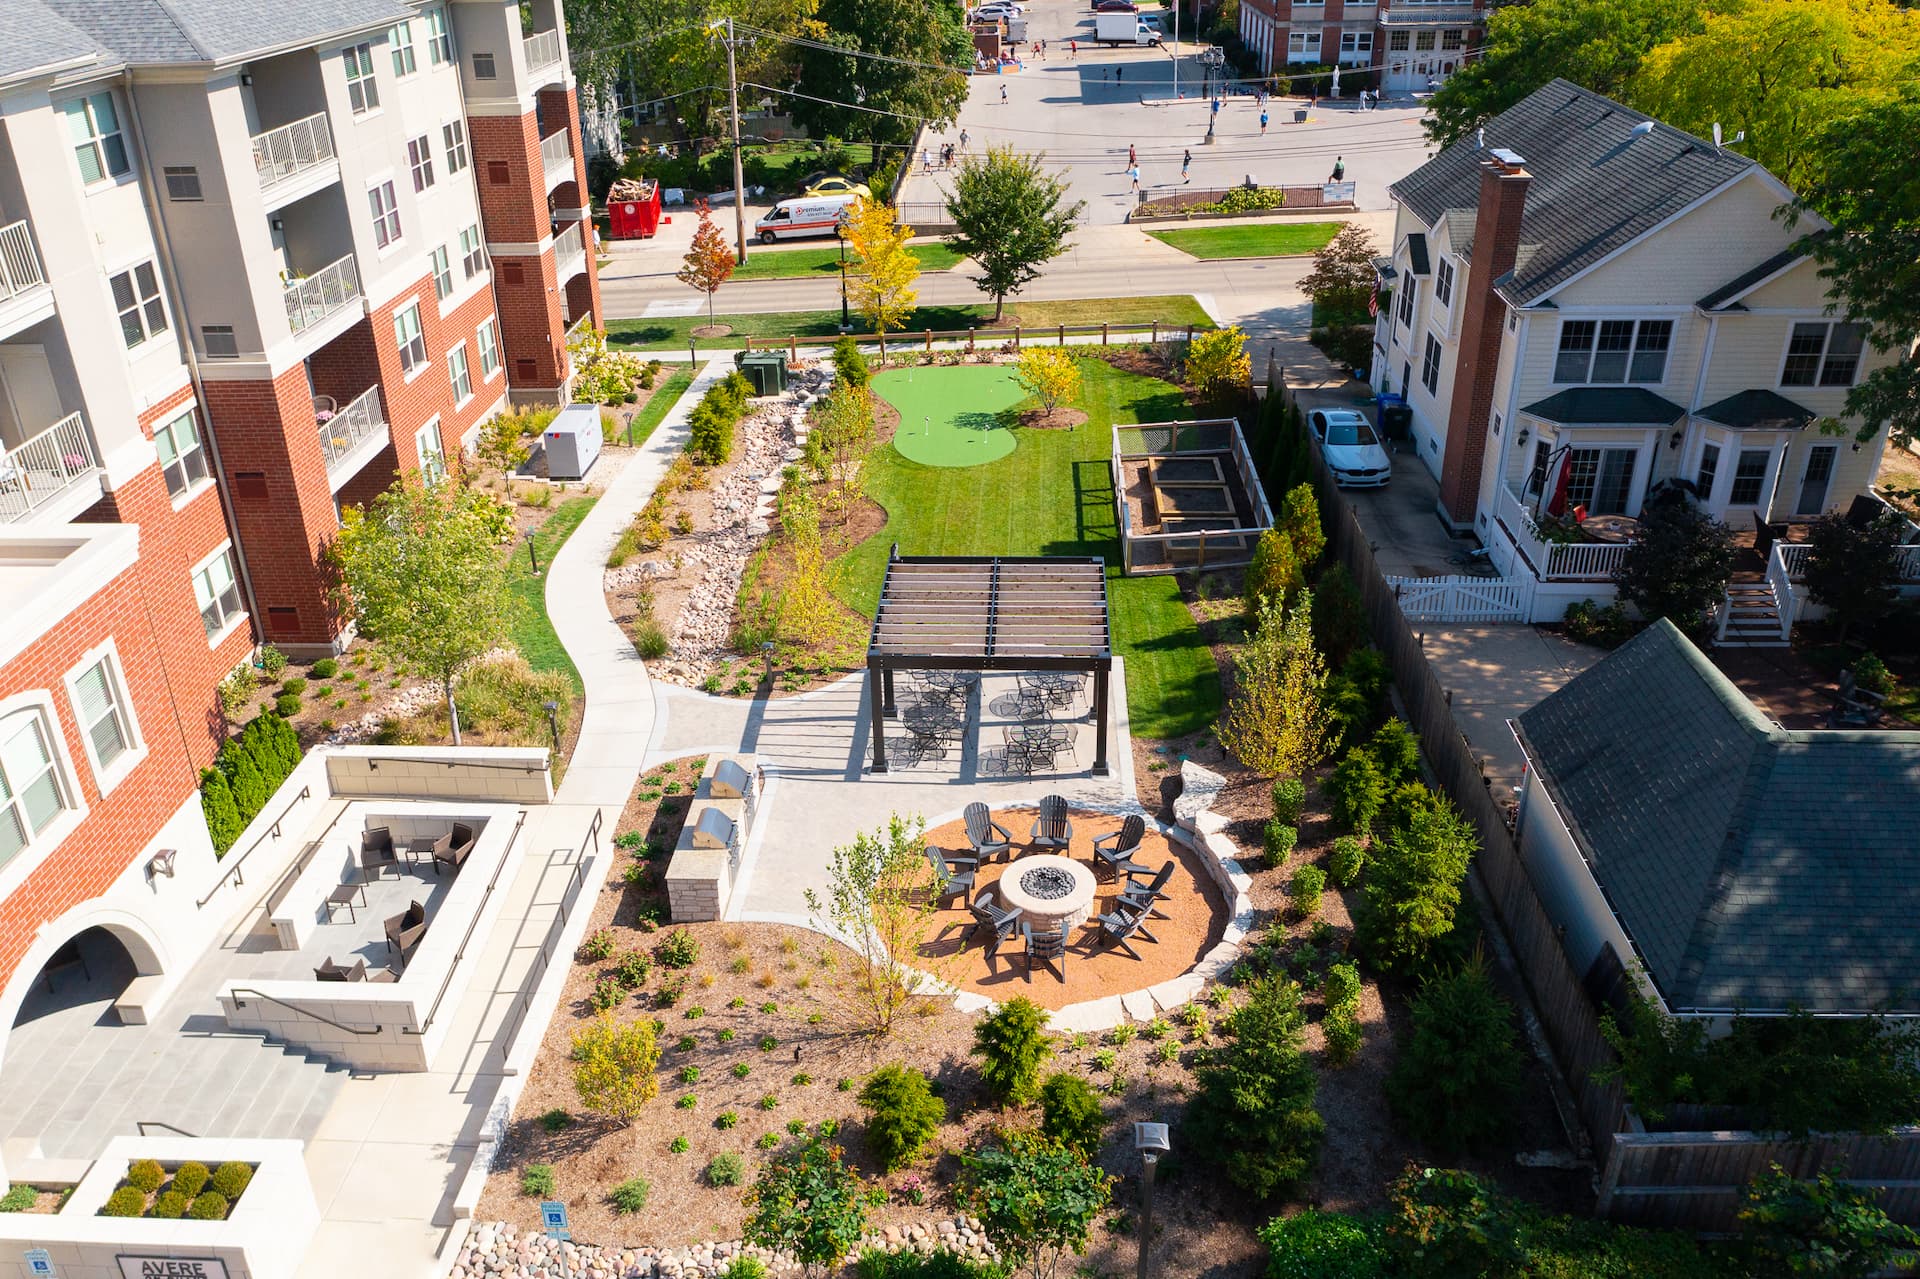 Aerial view of exterior amenities, fire pit, putting green, and landscape